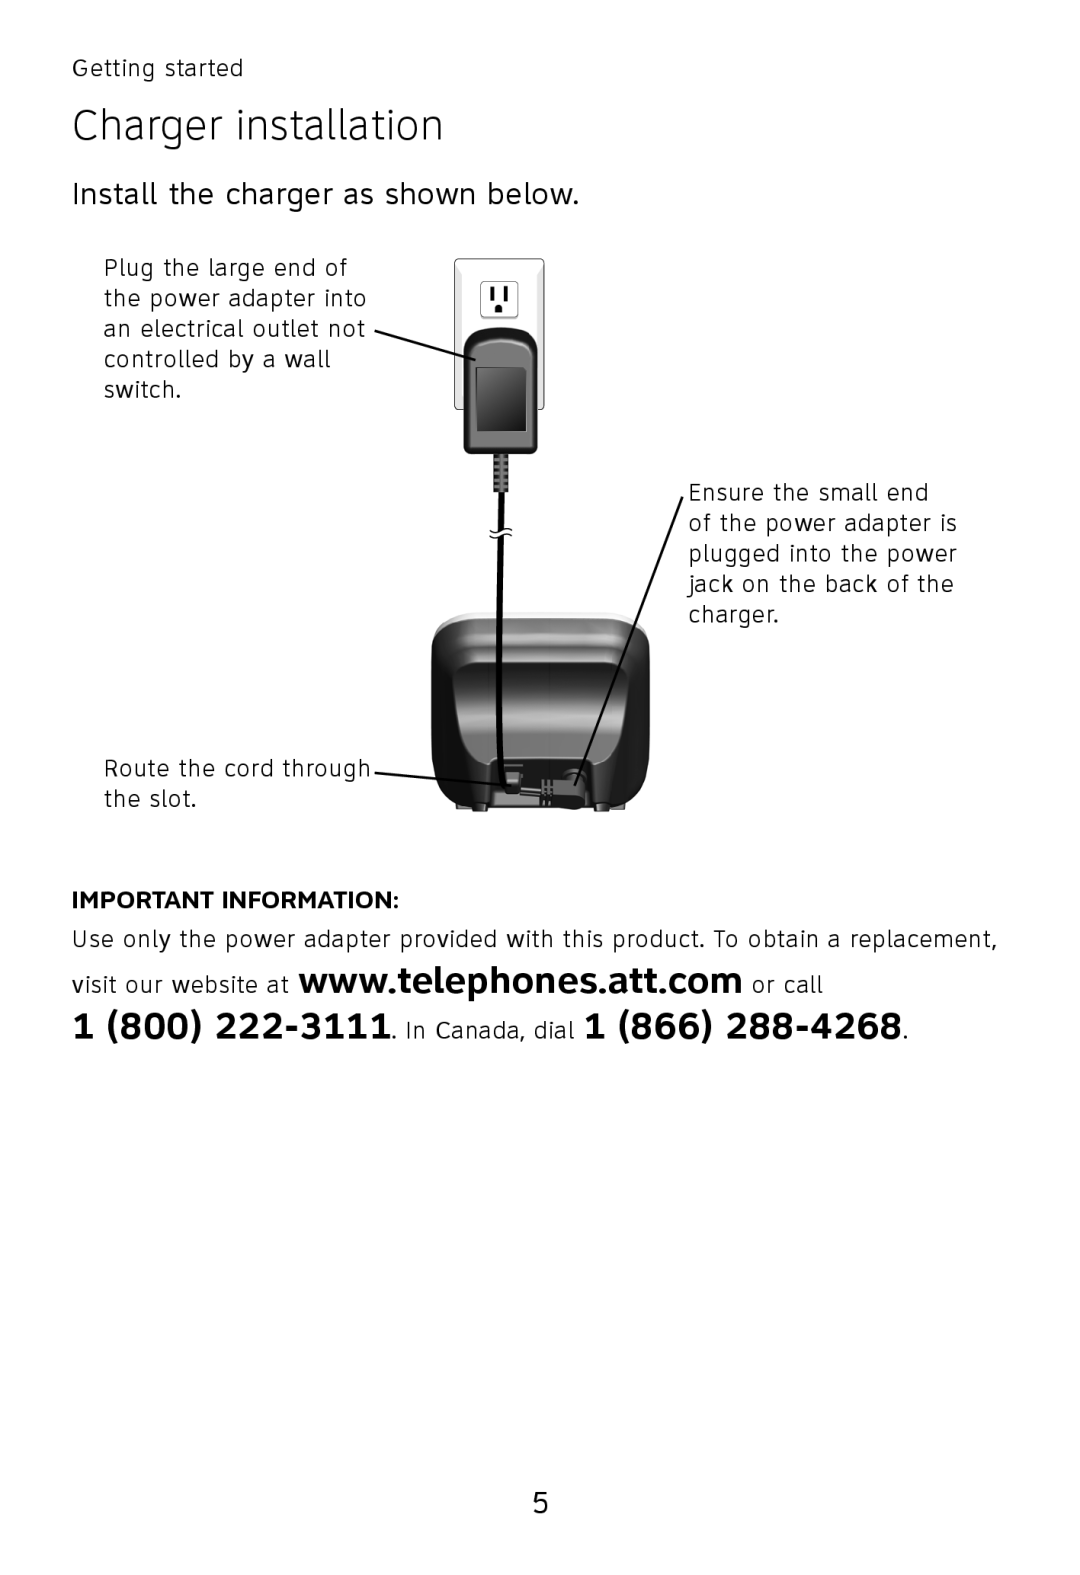 AT&T TL32100, TL32300, TL32200, TL30100 Charger installation, 1 800 222-3111. In Canada, dial 1 866, Important Information 